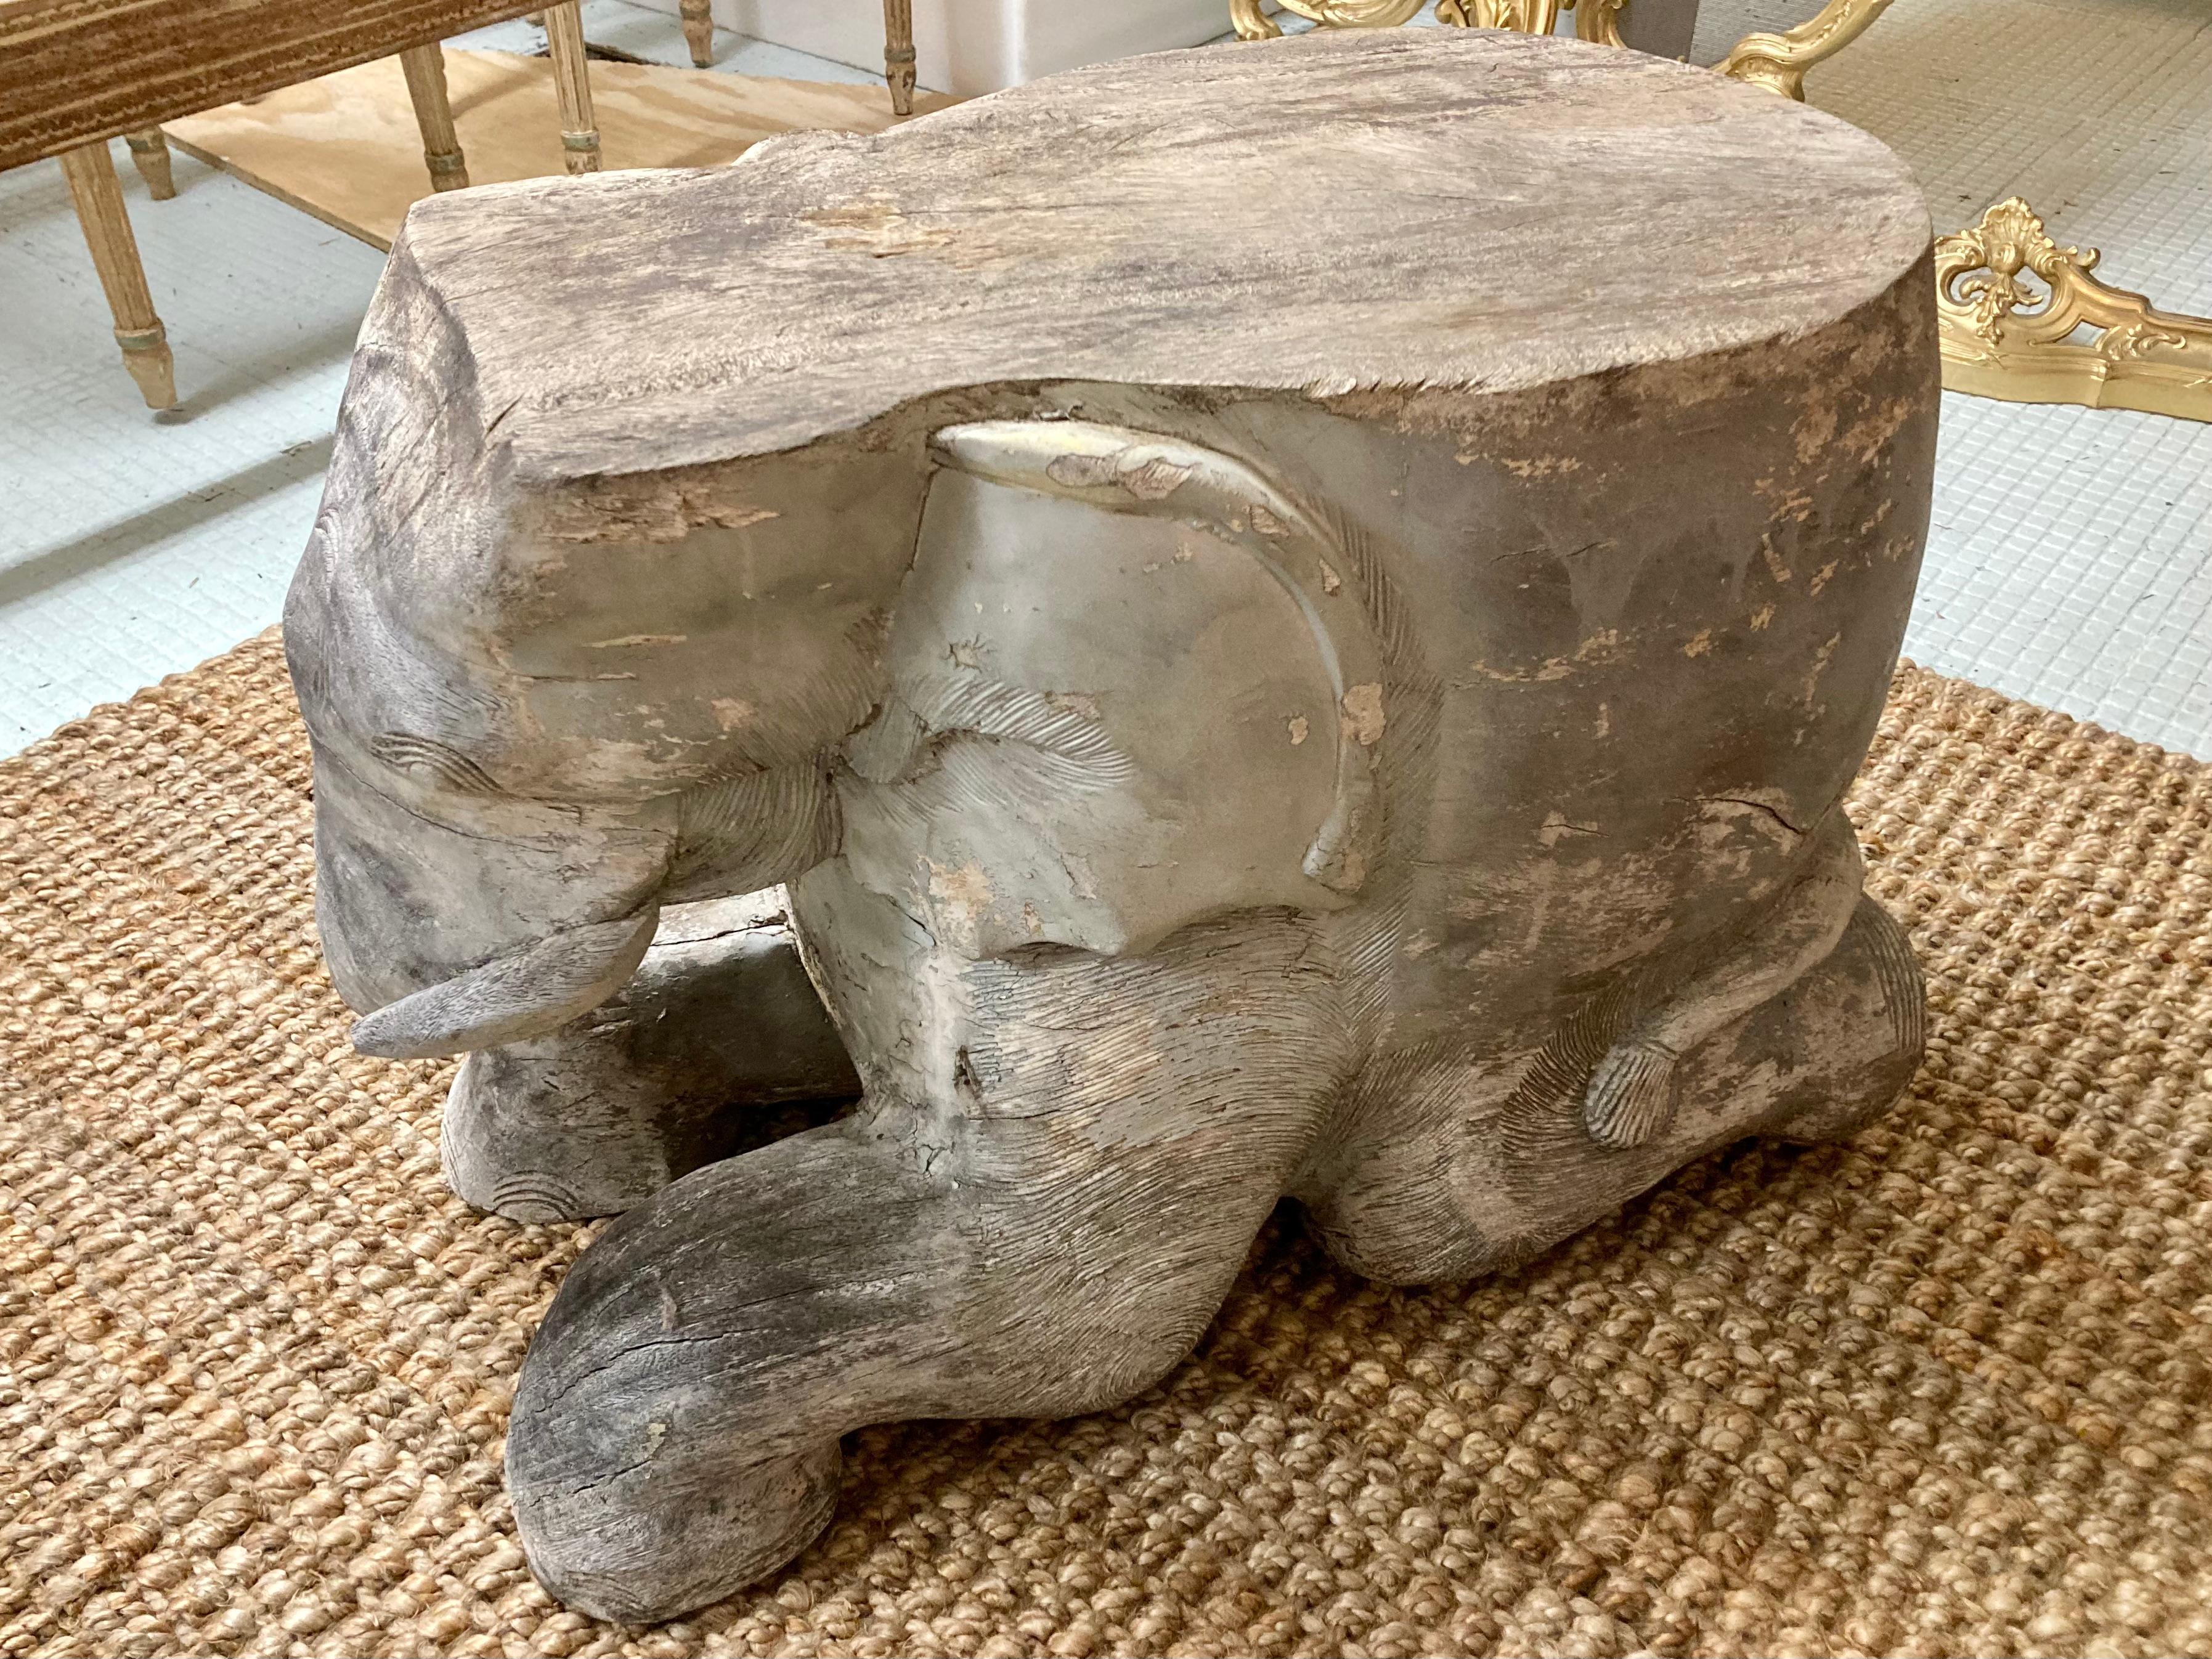 Beautiful carved wood elephant cocktail table/seat. This elephant shows trunk swinging to the left side, and we have two available in stock. Additionally, we have another pair with trunk swinging to the right so collect them all! They have an aged